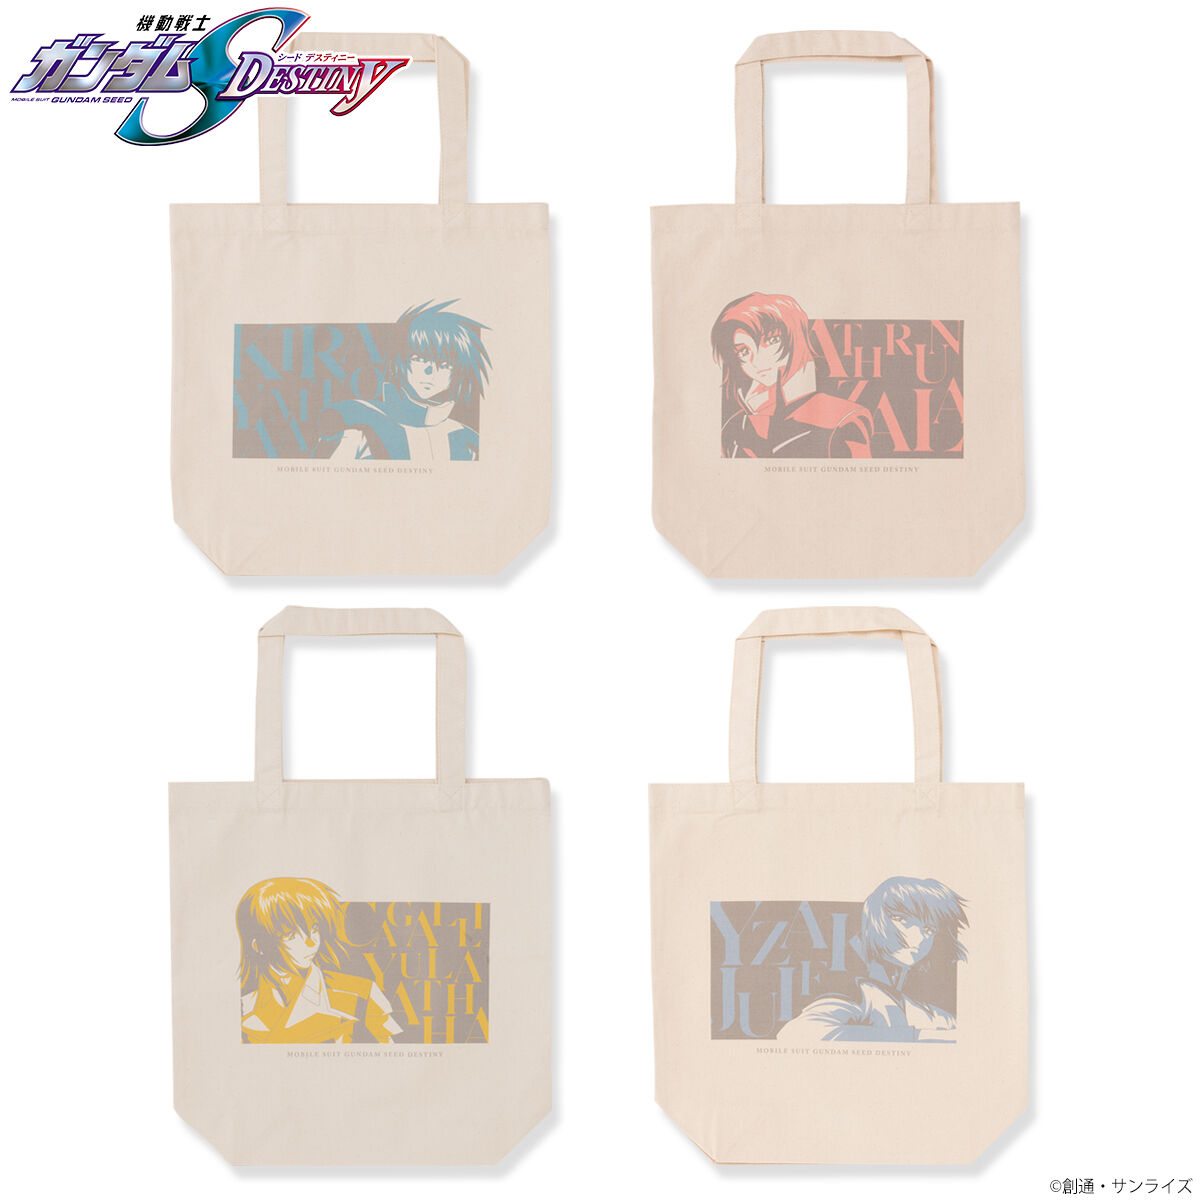 Mobile Suit Gundam SEED DESTINY Tricolor-themed Tote Bag